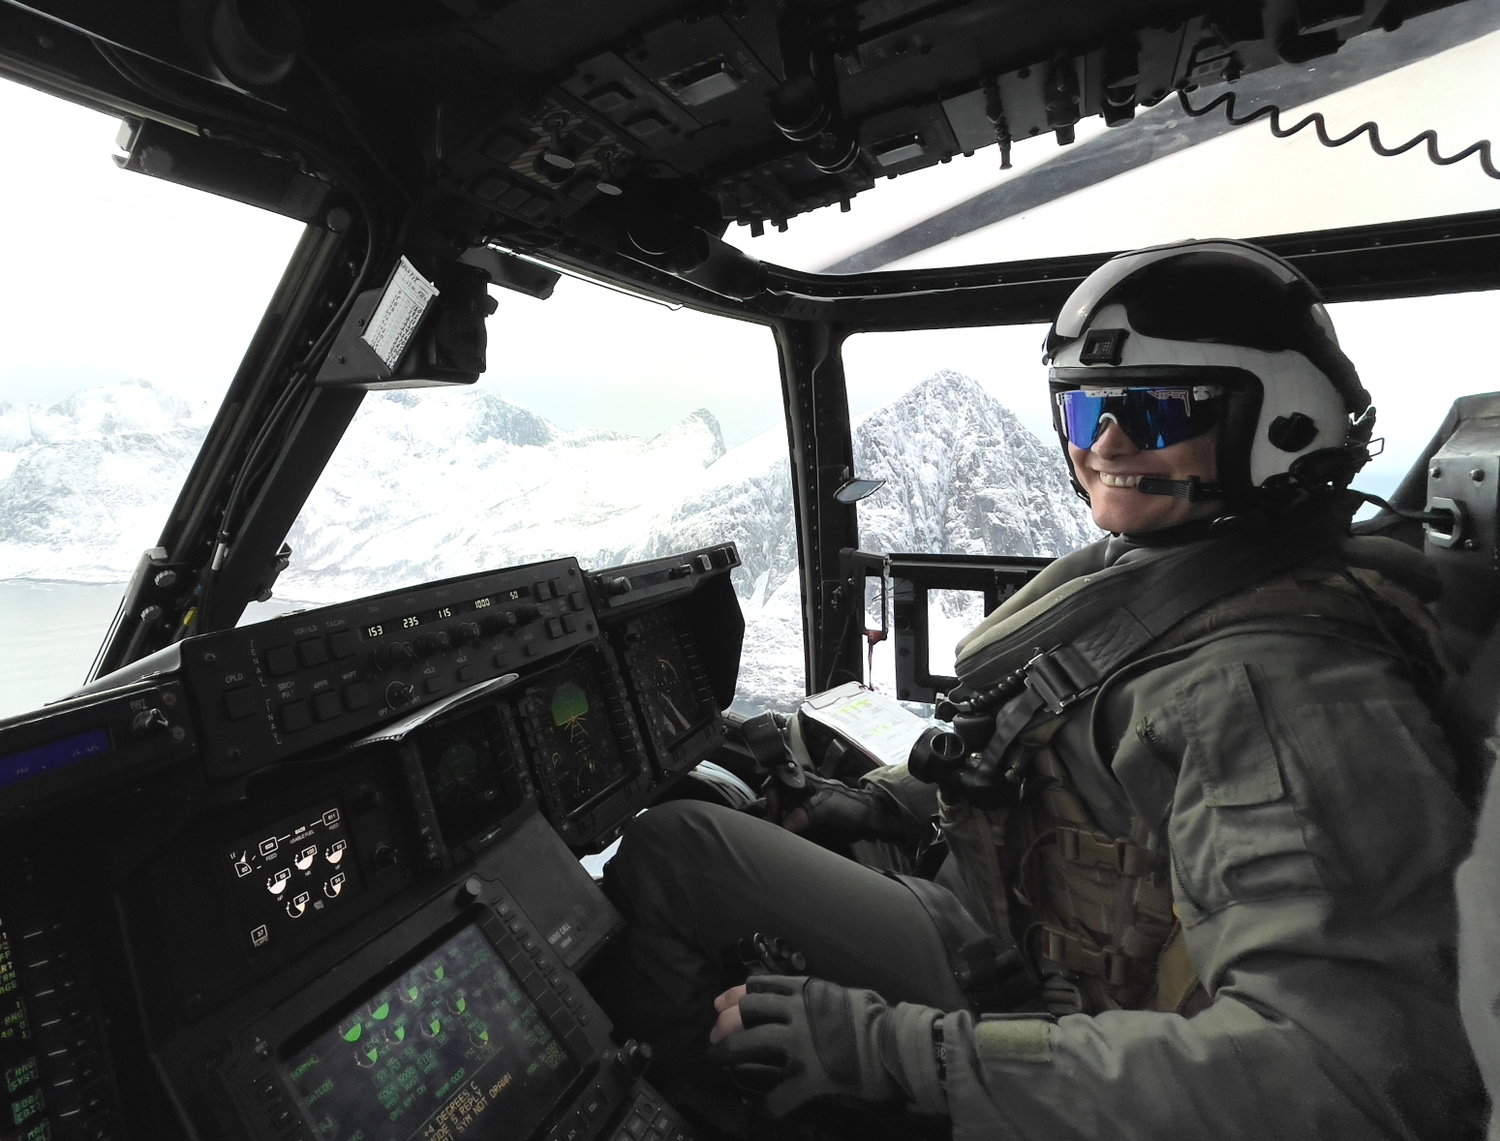 Capt. Eli Smith sees some beautiful sights from the cockpit of the Osprey. He had to train in several small aircraft before tackling the Osprey.